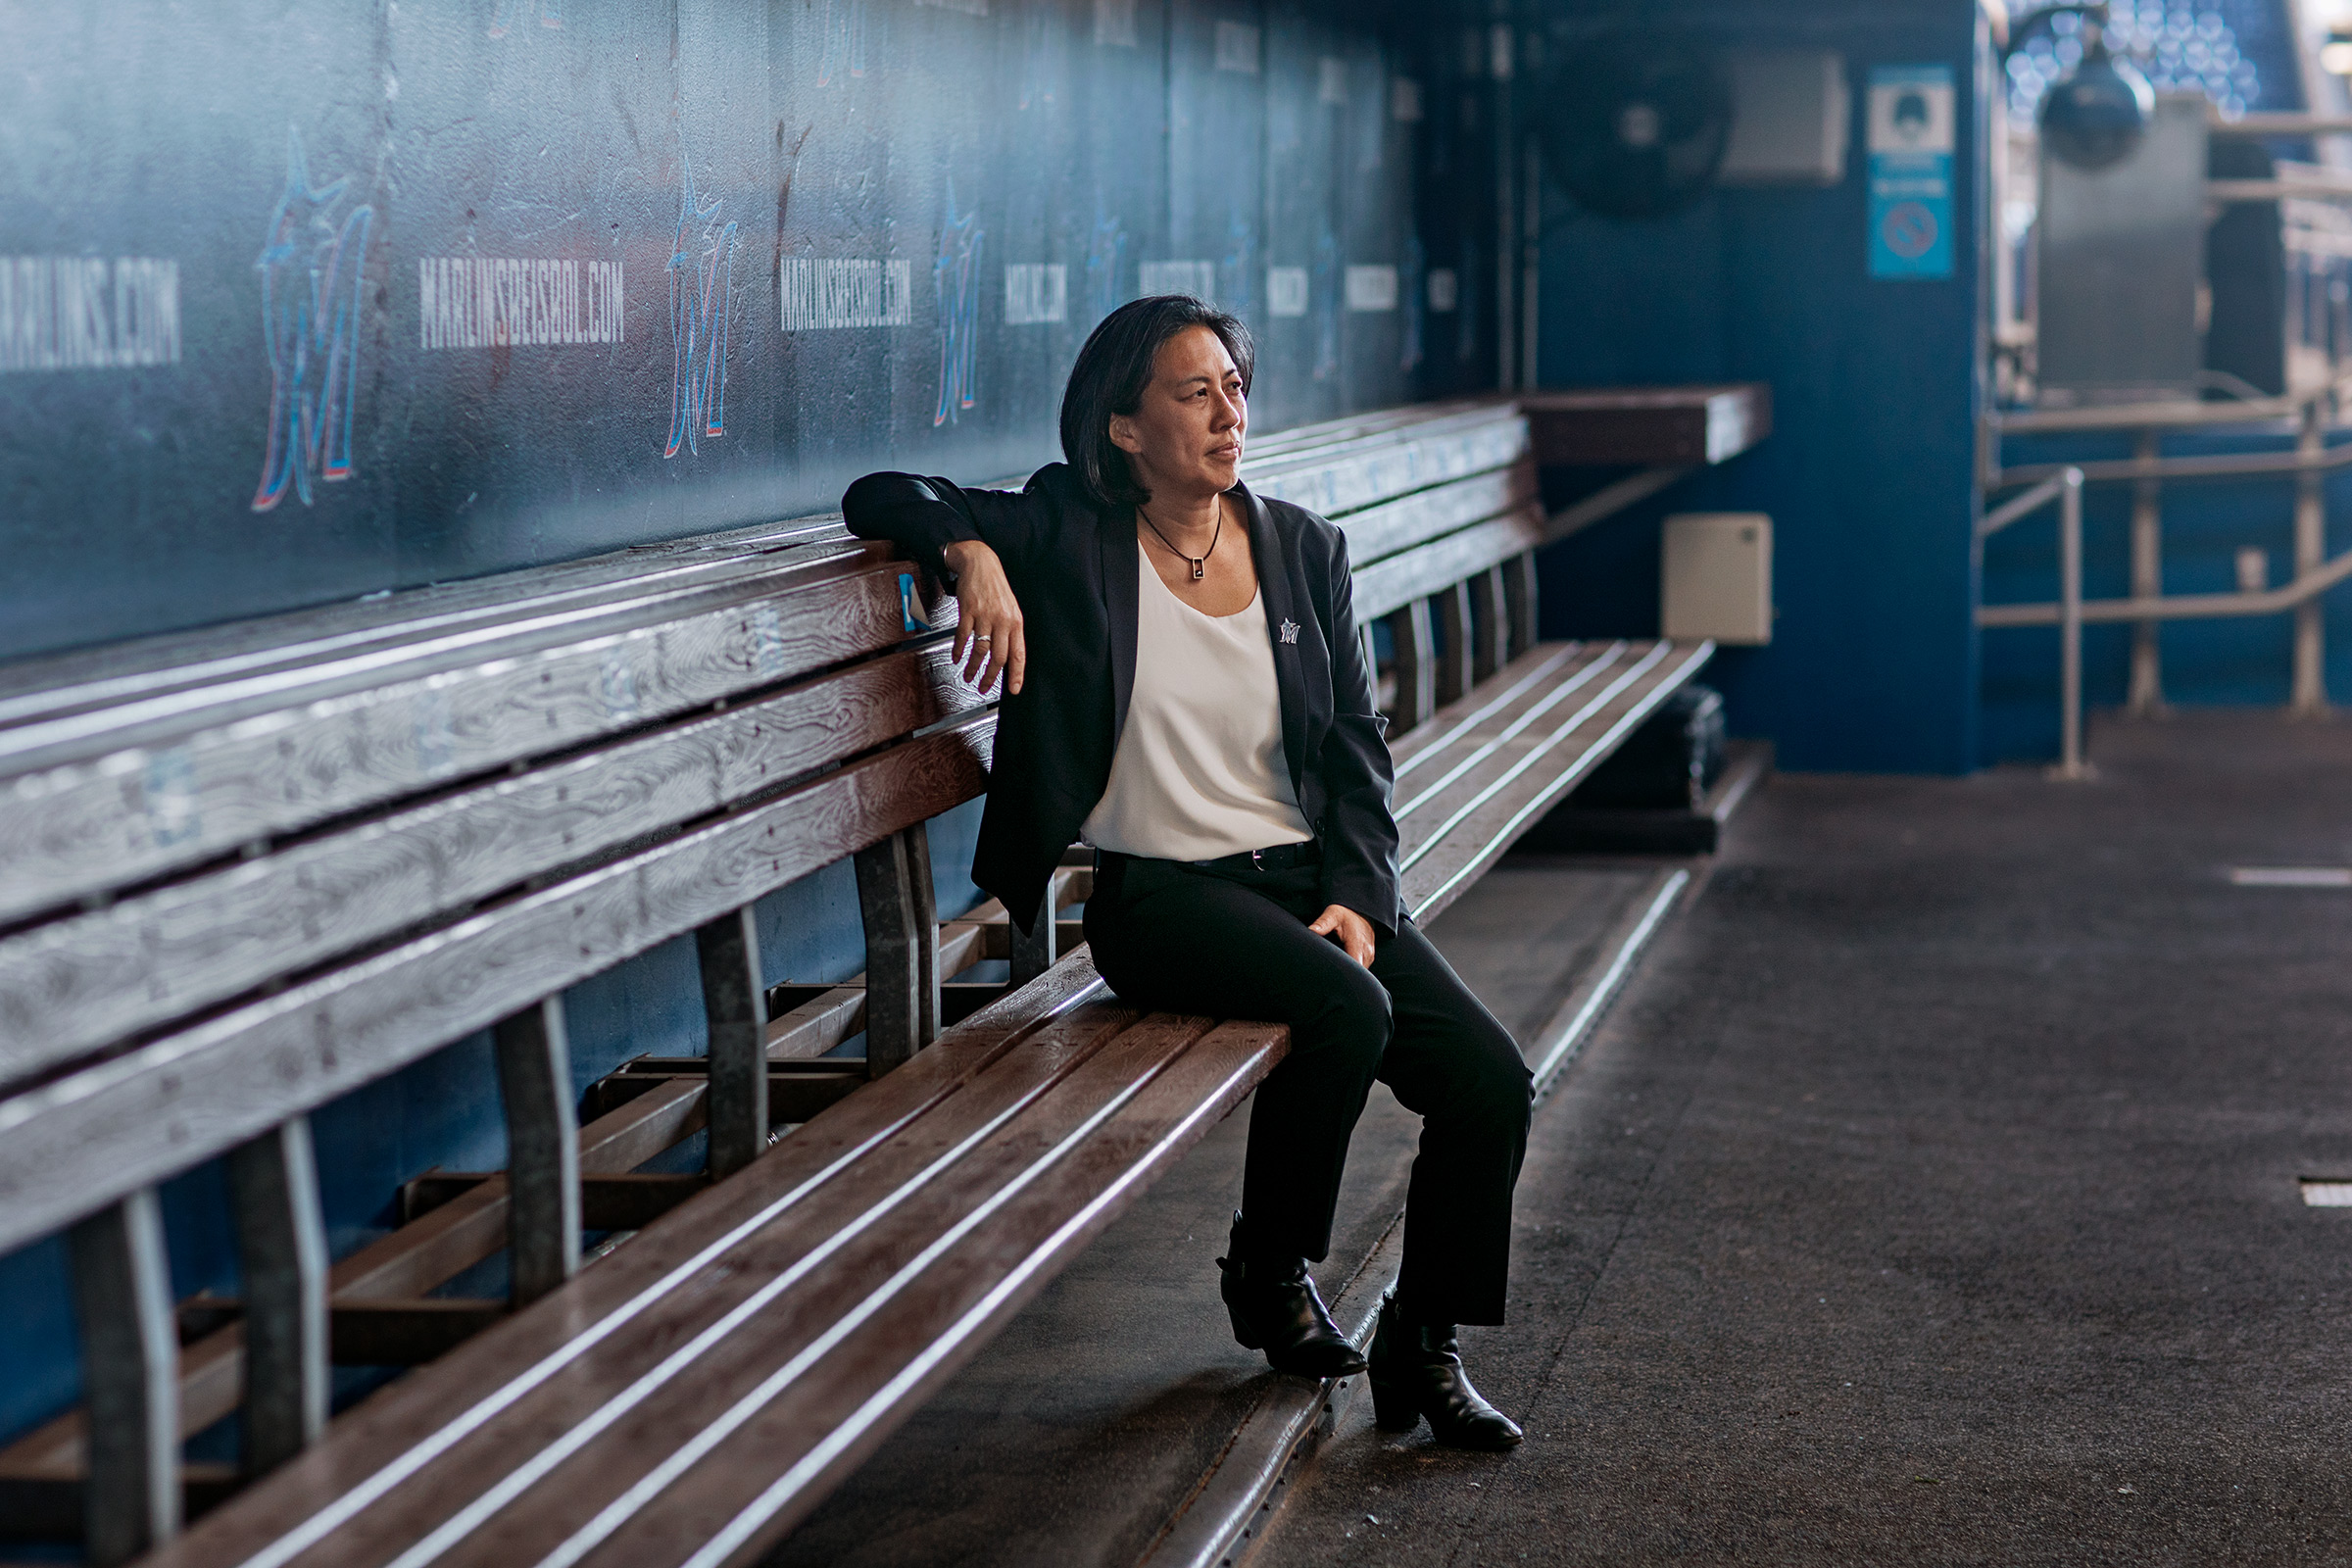 Kim Ng in the dugout of Marlins Park in Miami on Feb. 9 (Rose Marie Cromwell for TIME)